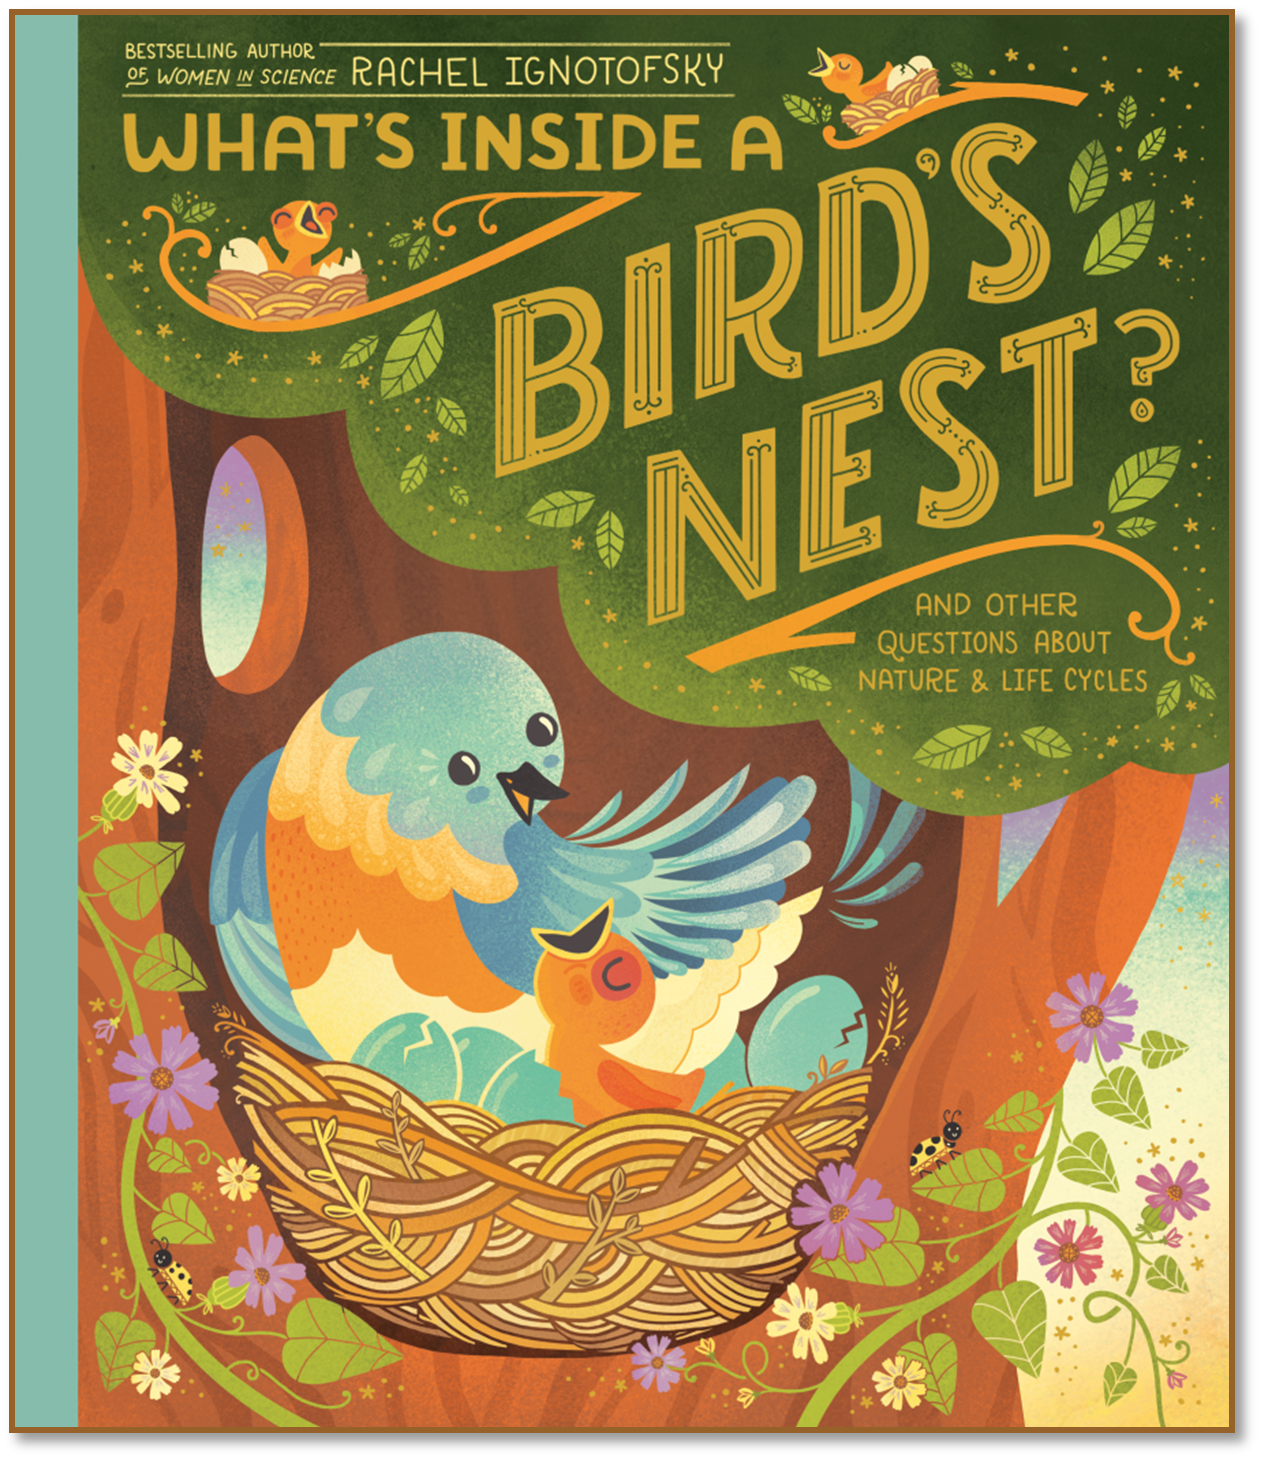 Book cover for title What's Inside a Bird's Nest? Cover shows a tree with a mother and baby bird in a nest.